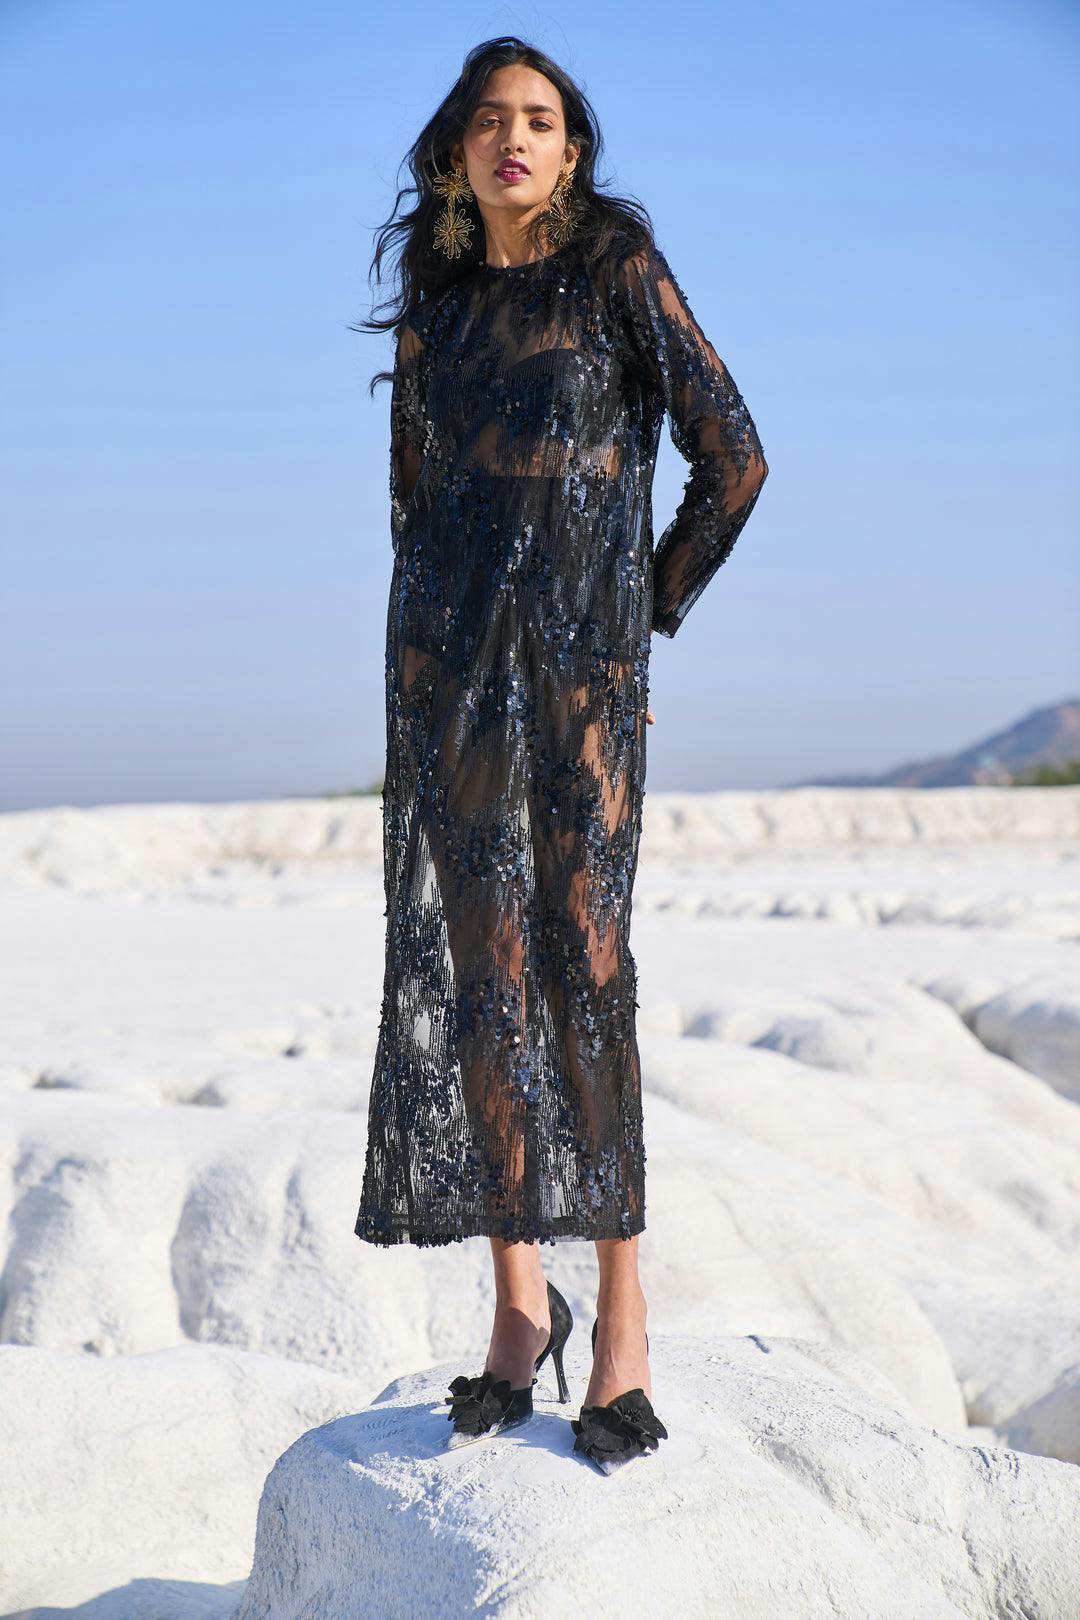 Sheer Sequin Dress, a product by Dash & Dot